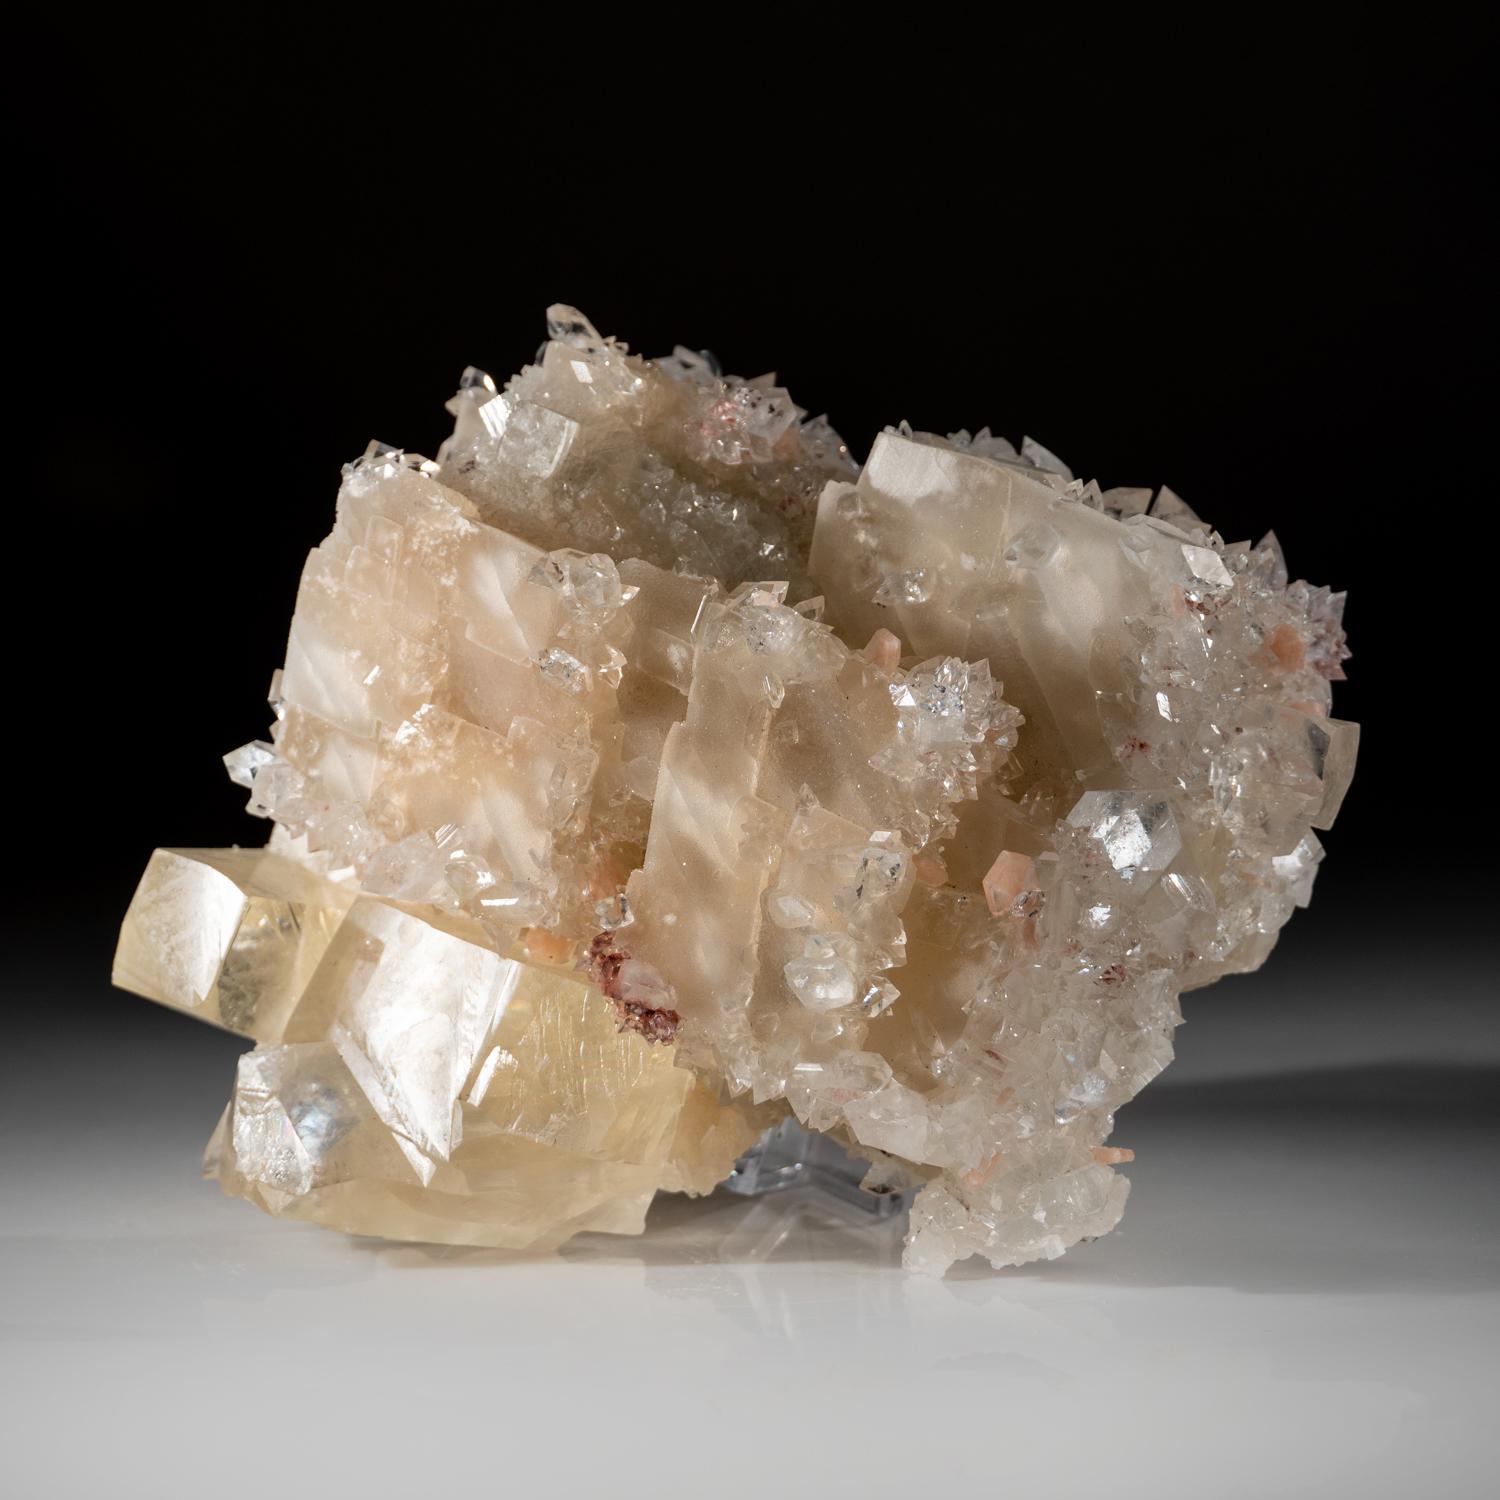 From Jalgaon,  Maharashtra, India

Large cabinet specimen of rich golden yellow calcite crystal cluster partially covered in lustrous gem apophyllite crystals. The calcite has sharp rhombohedral form with lustrous faces showing sub parallel